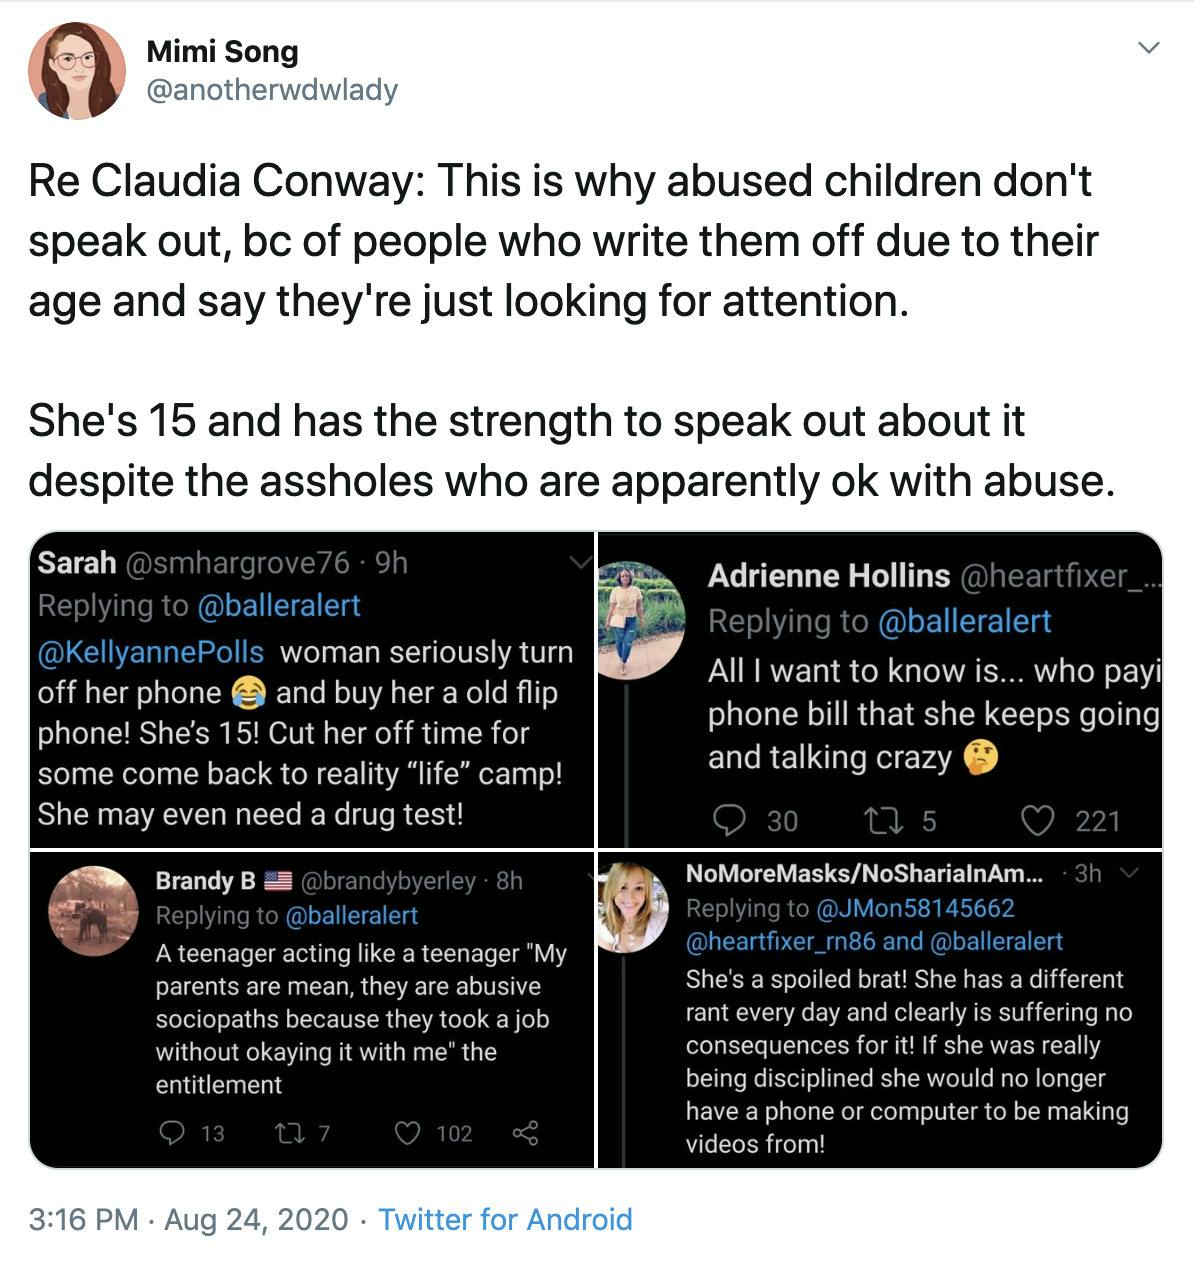 "Re Claudia Conway: This is why abused children don't speak out, bc of people who write them off due to their age and say they're just looking for attention.   She's 15 and has the strength to speak out about it despite the assholes who are apparently ok with abuse." screenshots of people accusing Claudia of b4ing a spoiled brat who should have her phone taken away